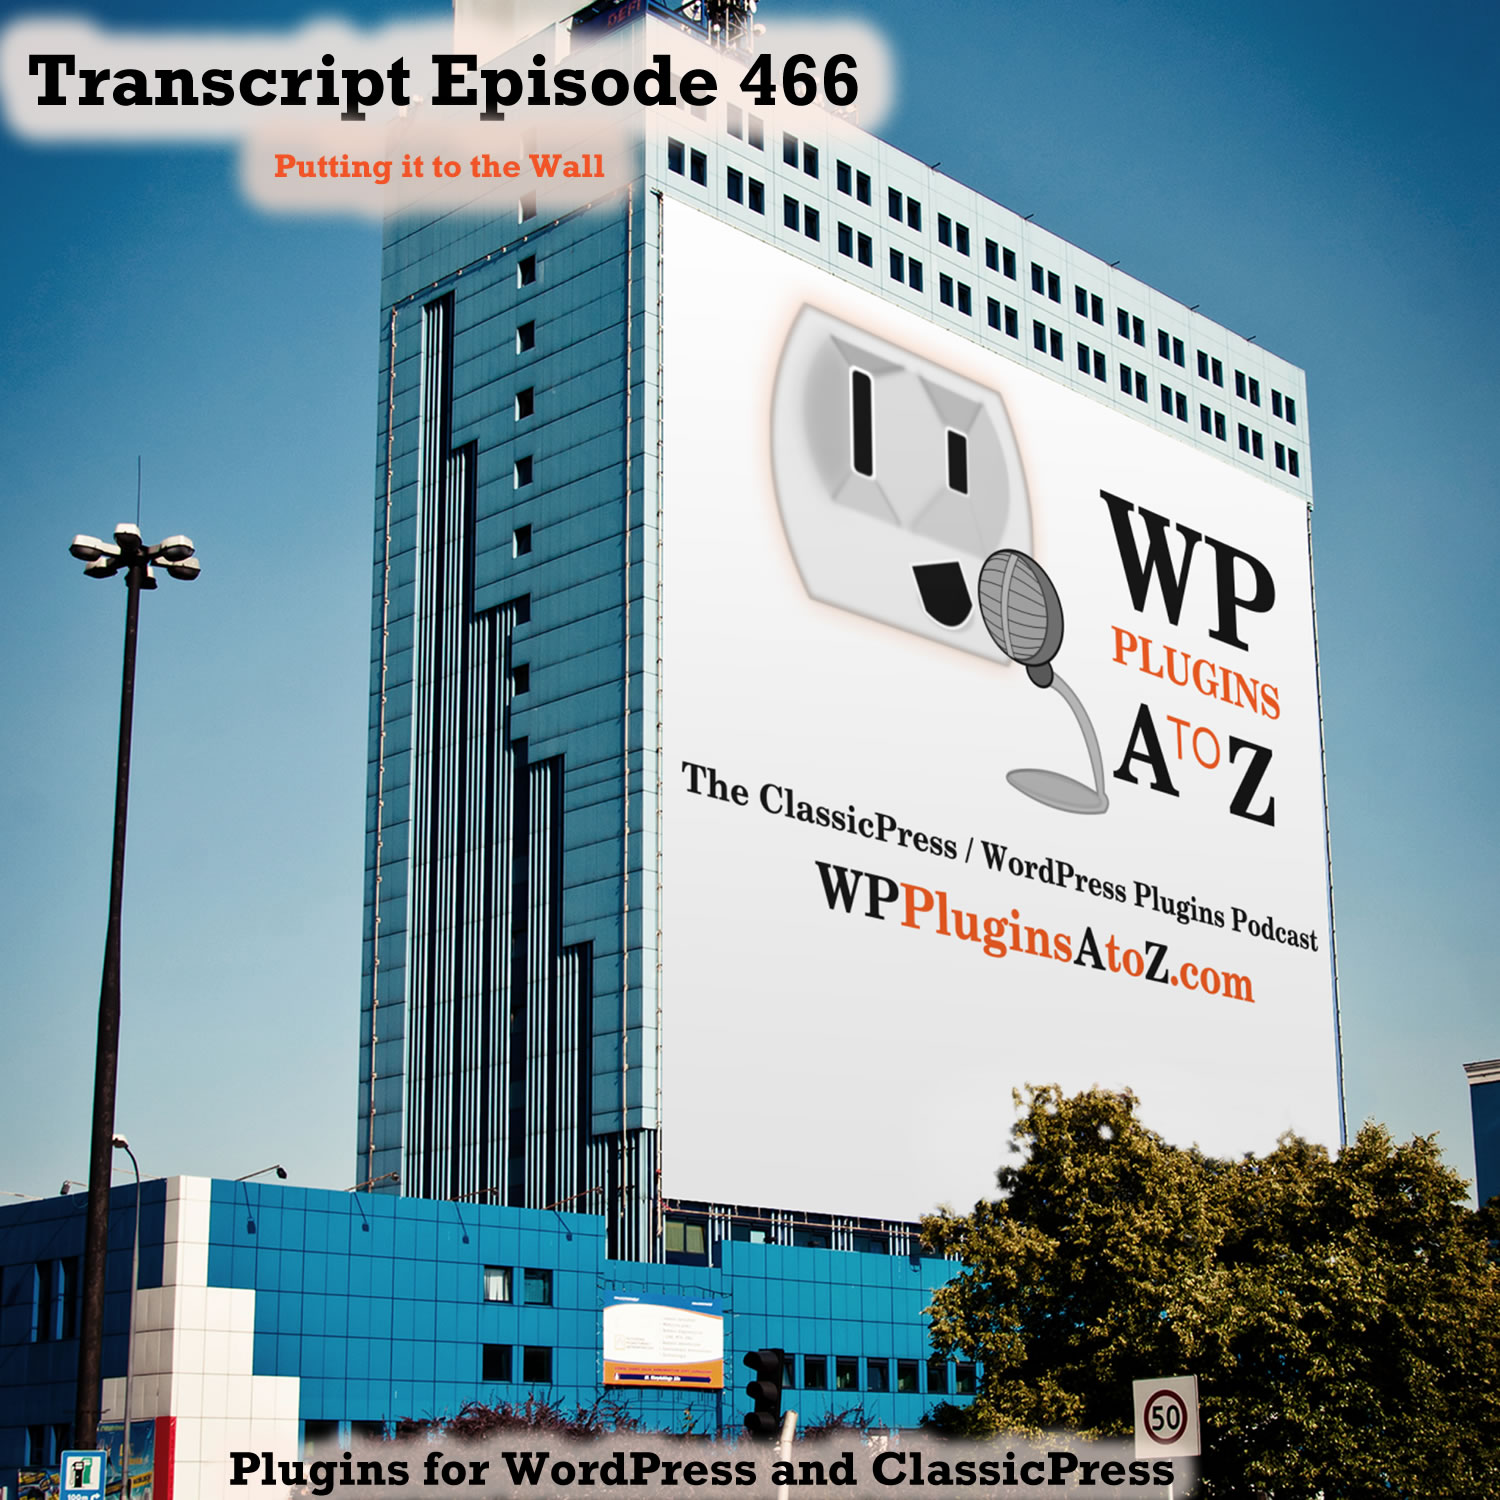 It's Episode 466 with plugins to Colour Your World, Zipping it all up, Insuring those products are available and ClassicPress Options. It's all coming up on WordPress Plugins A-Z!